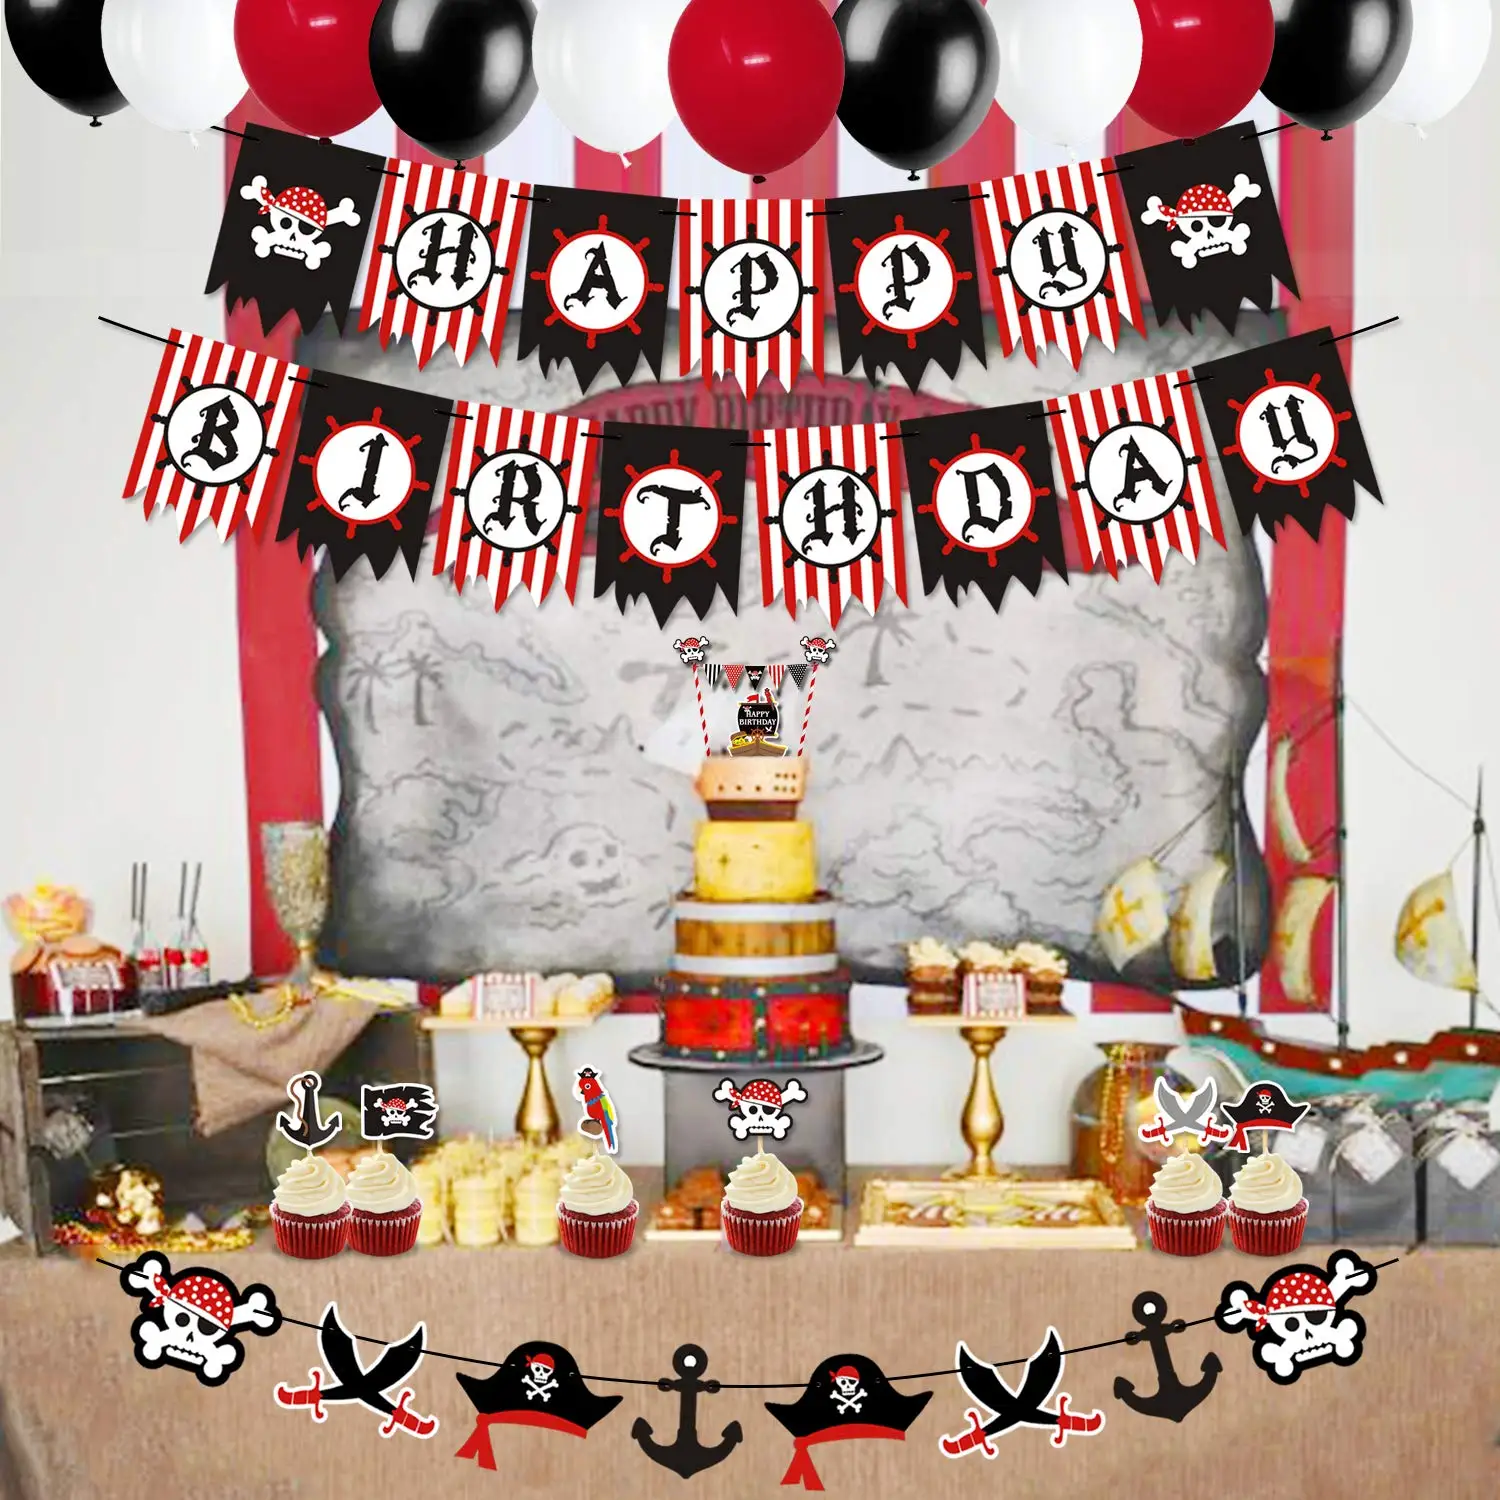 Pirate Theme Birthday Party Supplies Baby Shower Happy Birthday Banner Pirate Balloons Cake Topper for Boys Kids Children 1st 2nd 3rd 4th Birthday Geloar Pirate Birthday Party Decorations Black